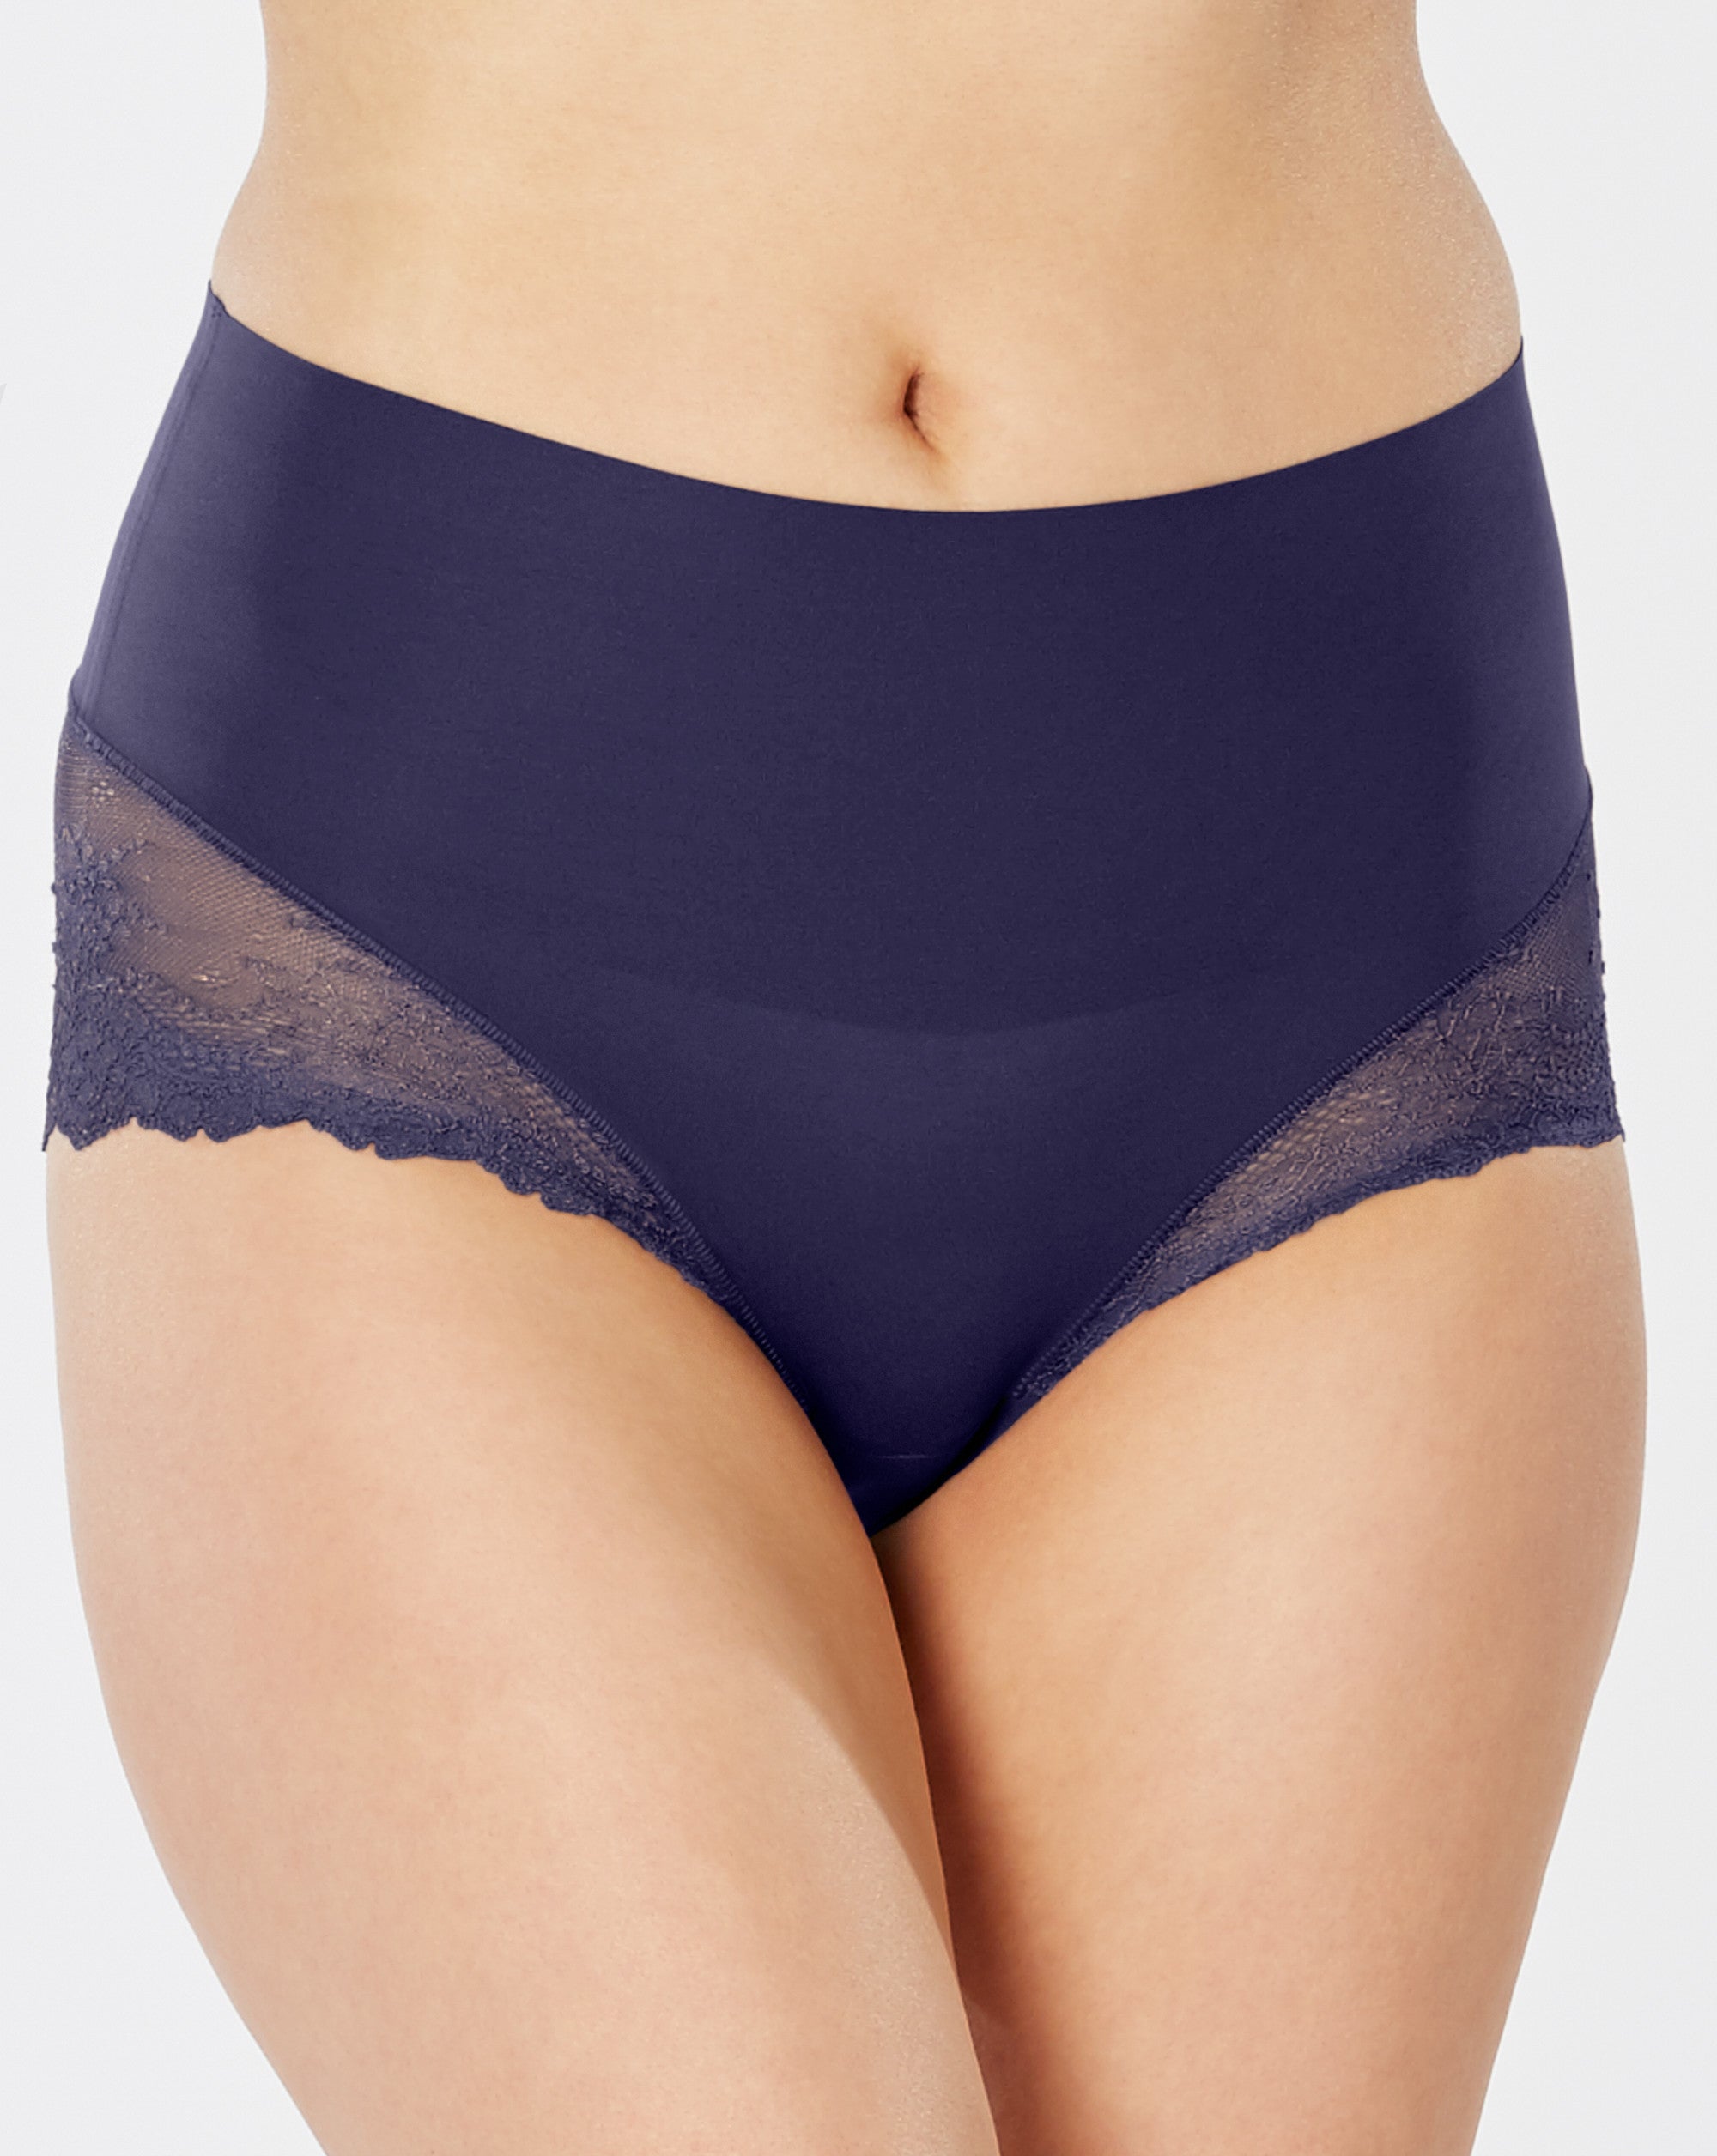 Apfopard Women's Lace Underwear Sexy Stretch Hipster Invisible